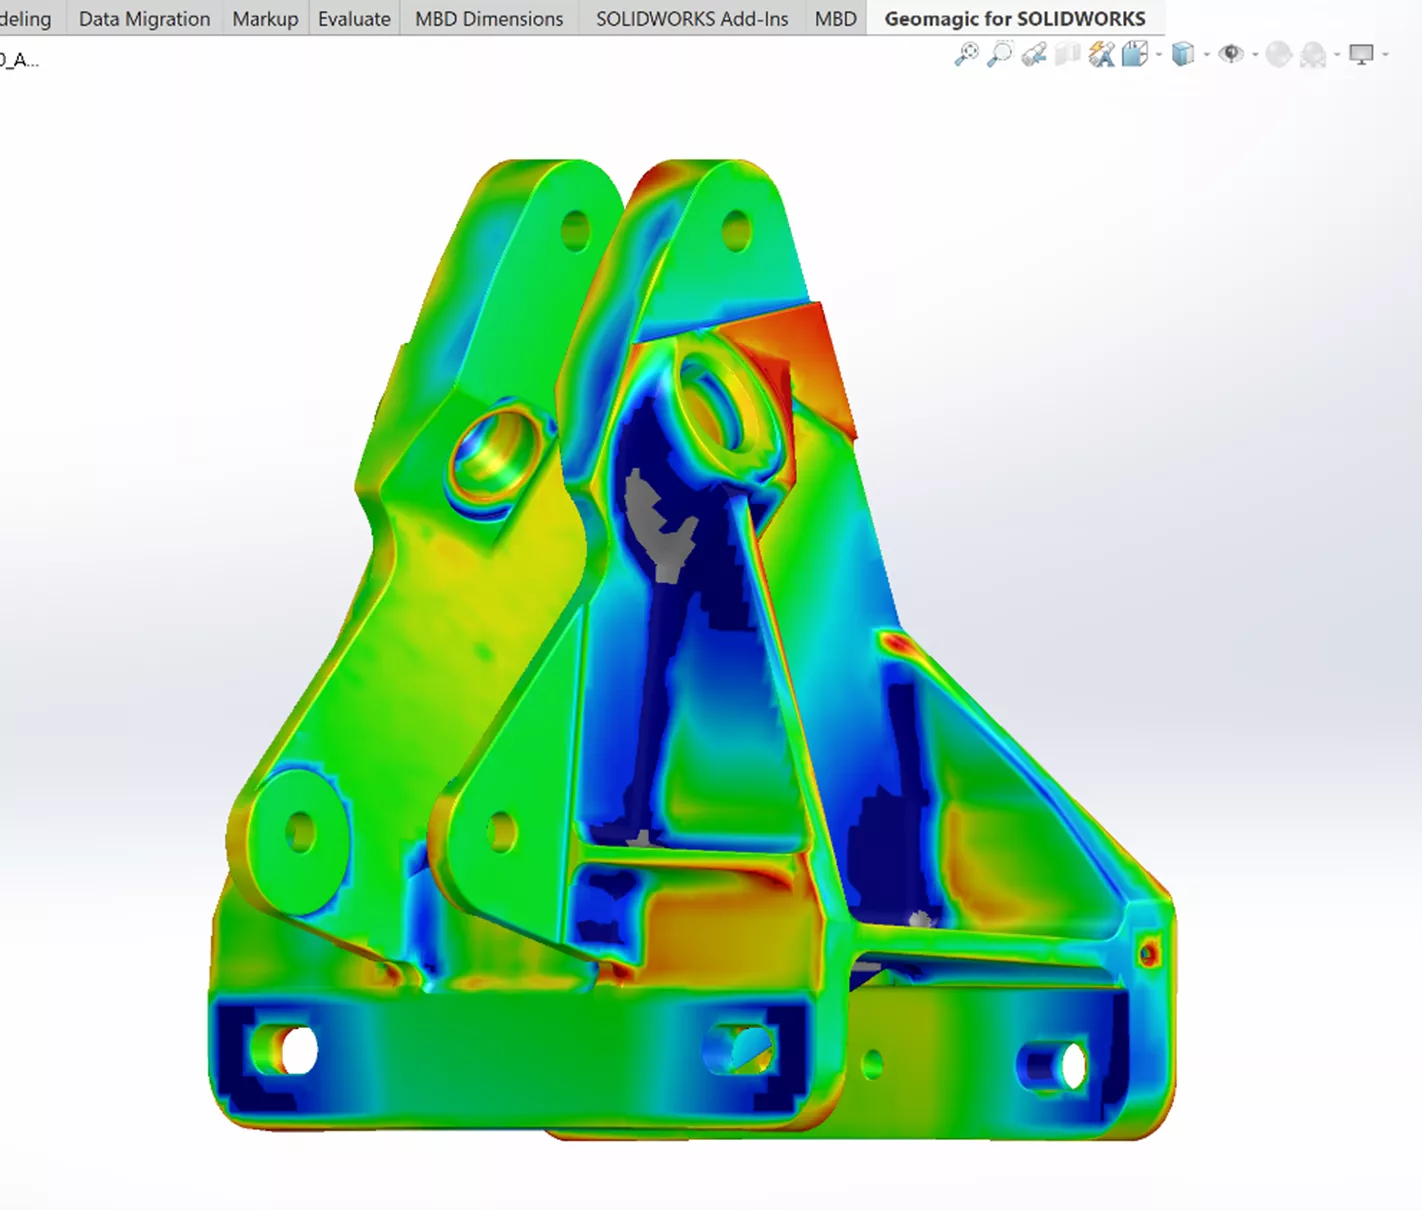 Deviation Analysis Tutorial in Geomagic for SOLIDWORKS